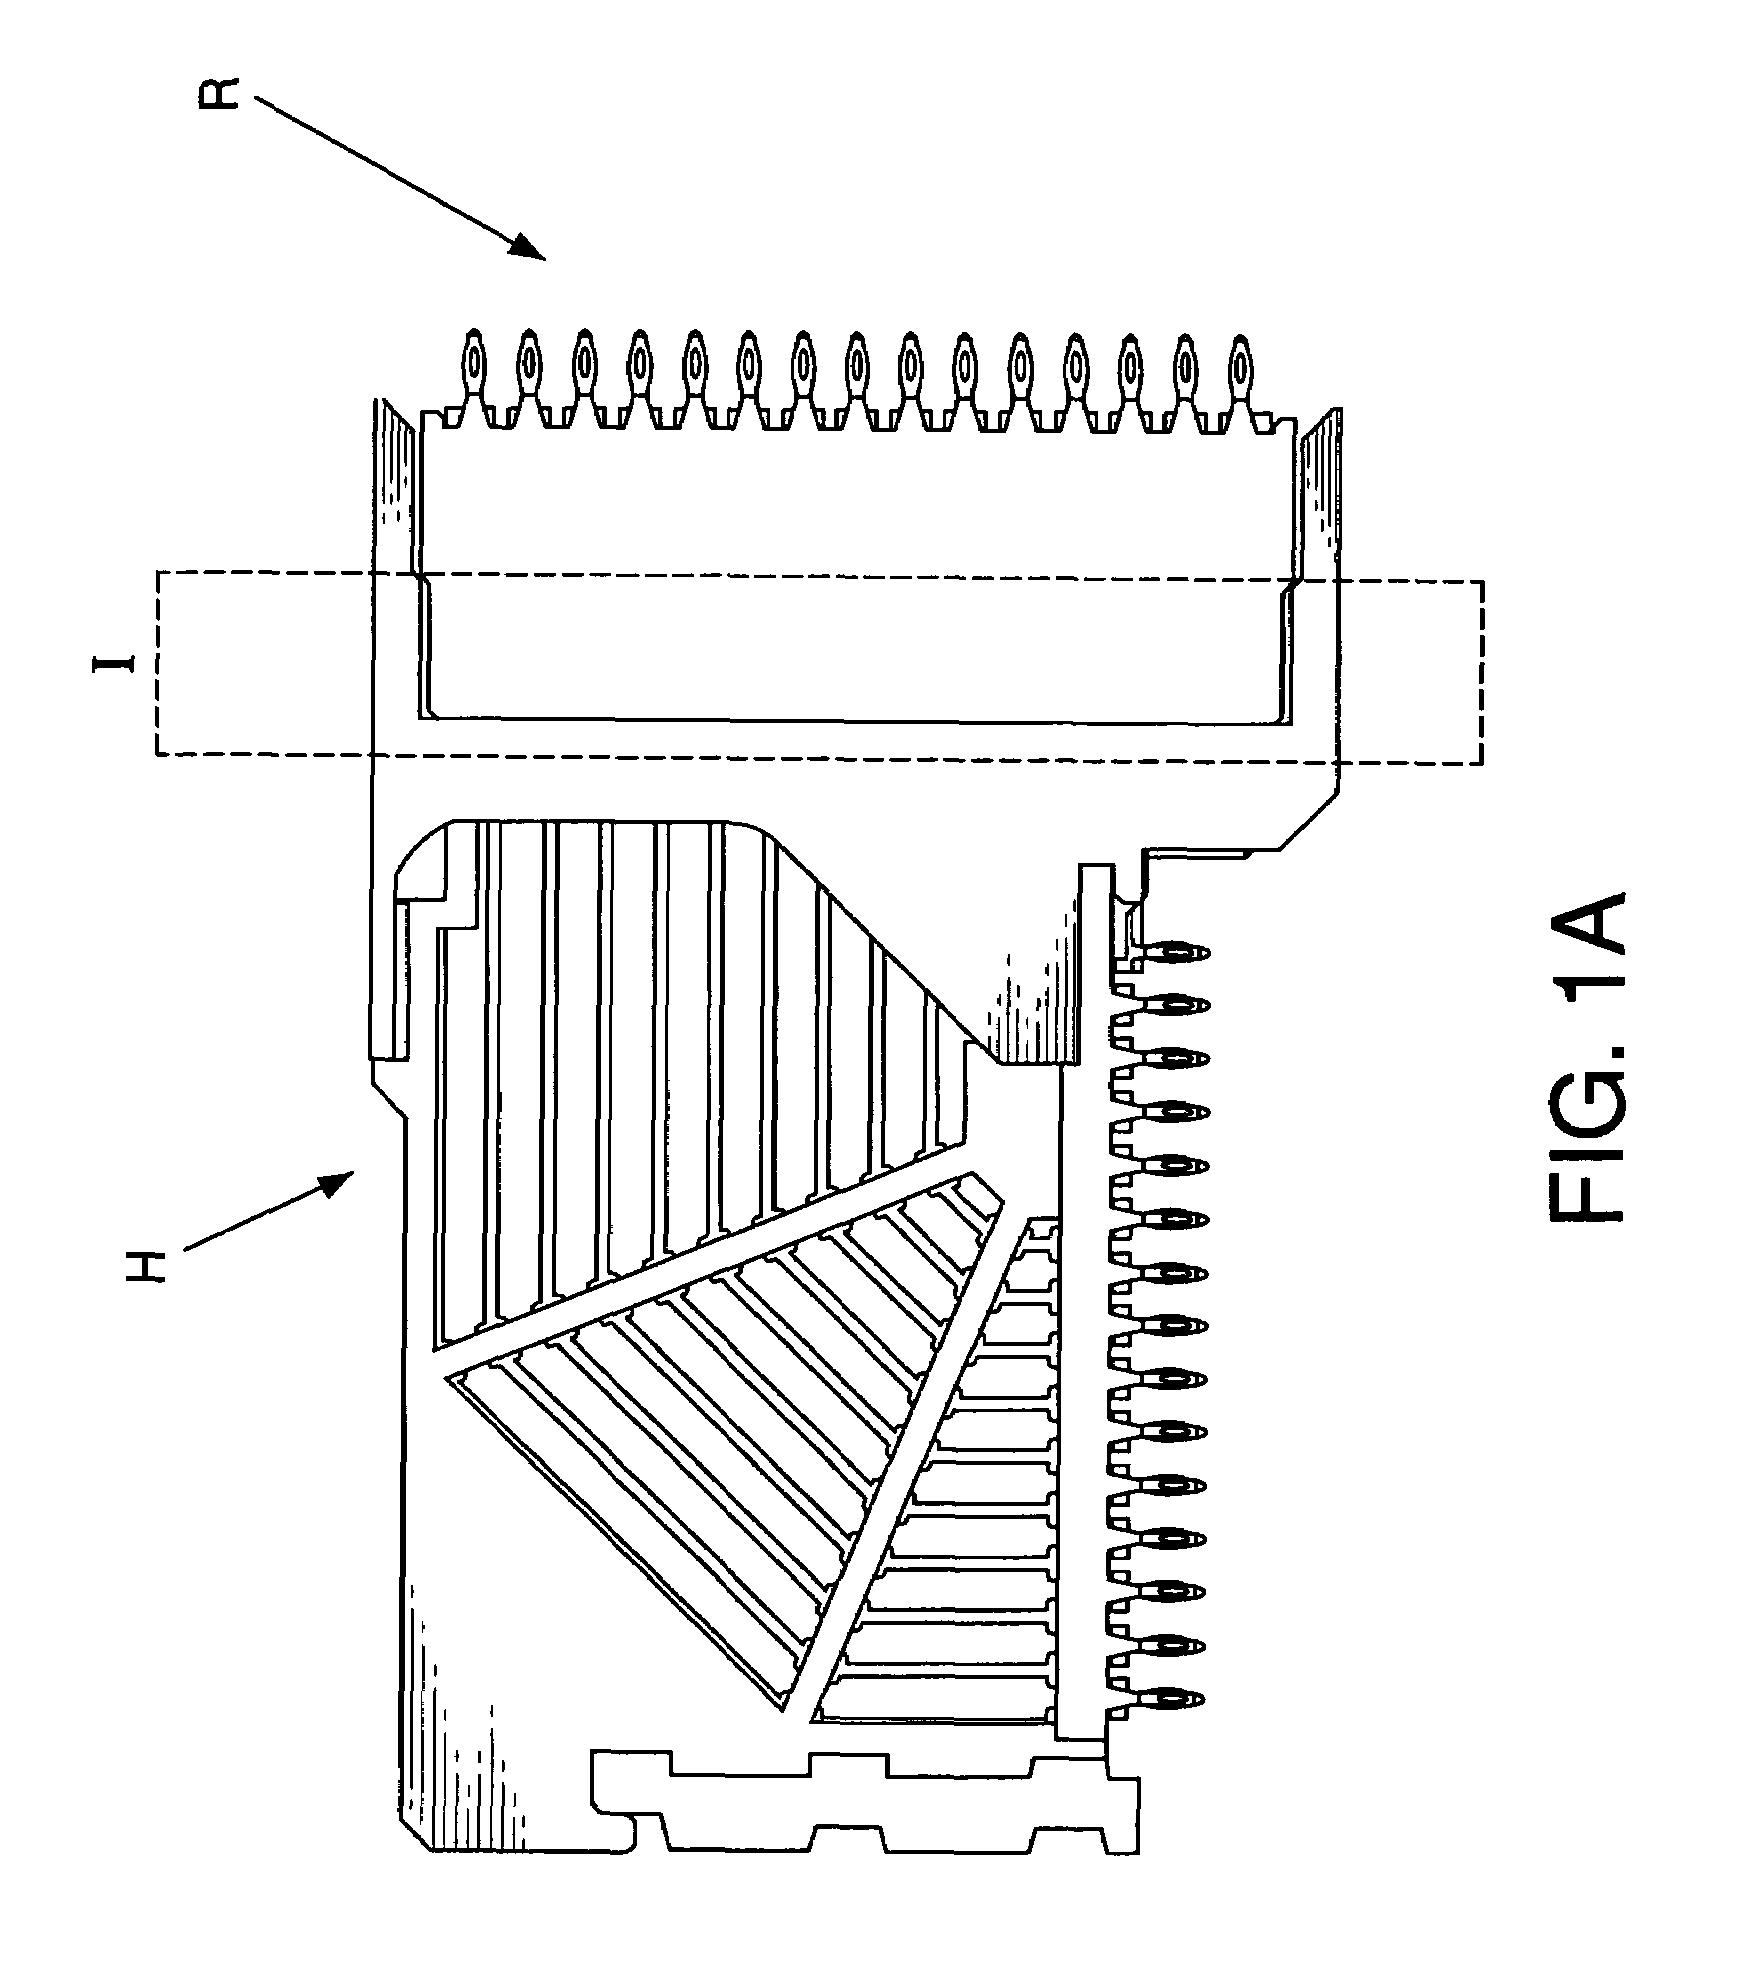 Impedance mating interface for electrical connectors